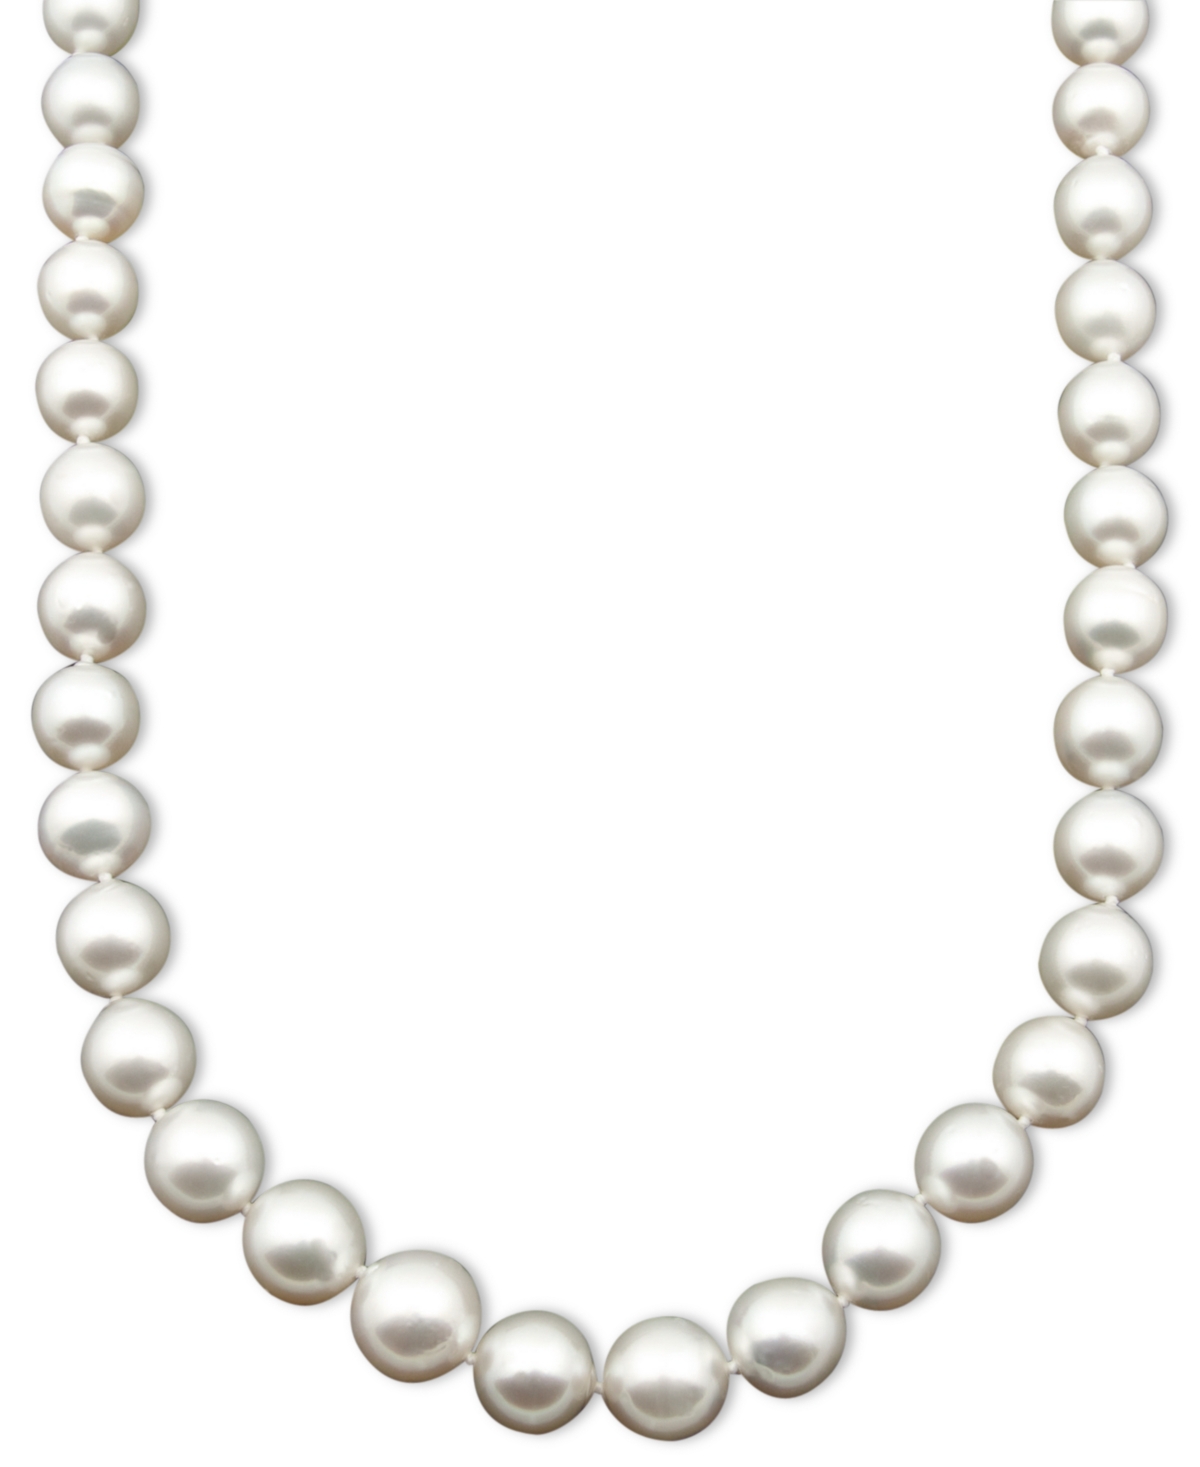 Pearl Necklace, 17" 14k White Gold A Cultured White South Sea Pearl Strand (9-11mm)